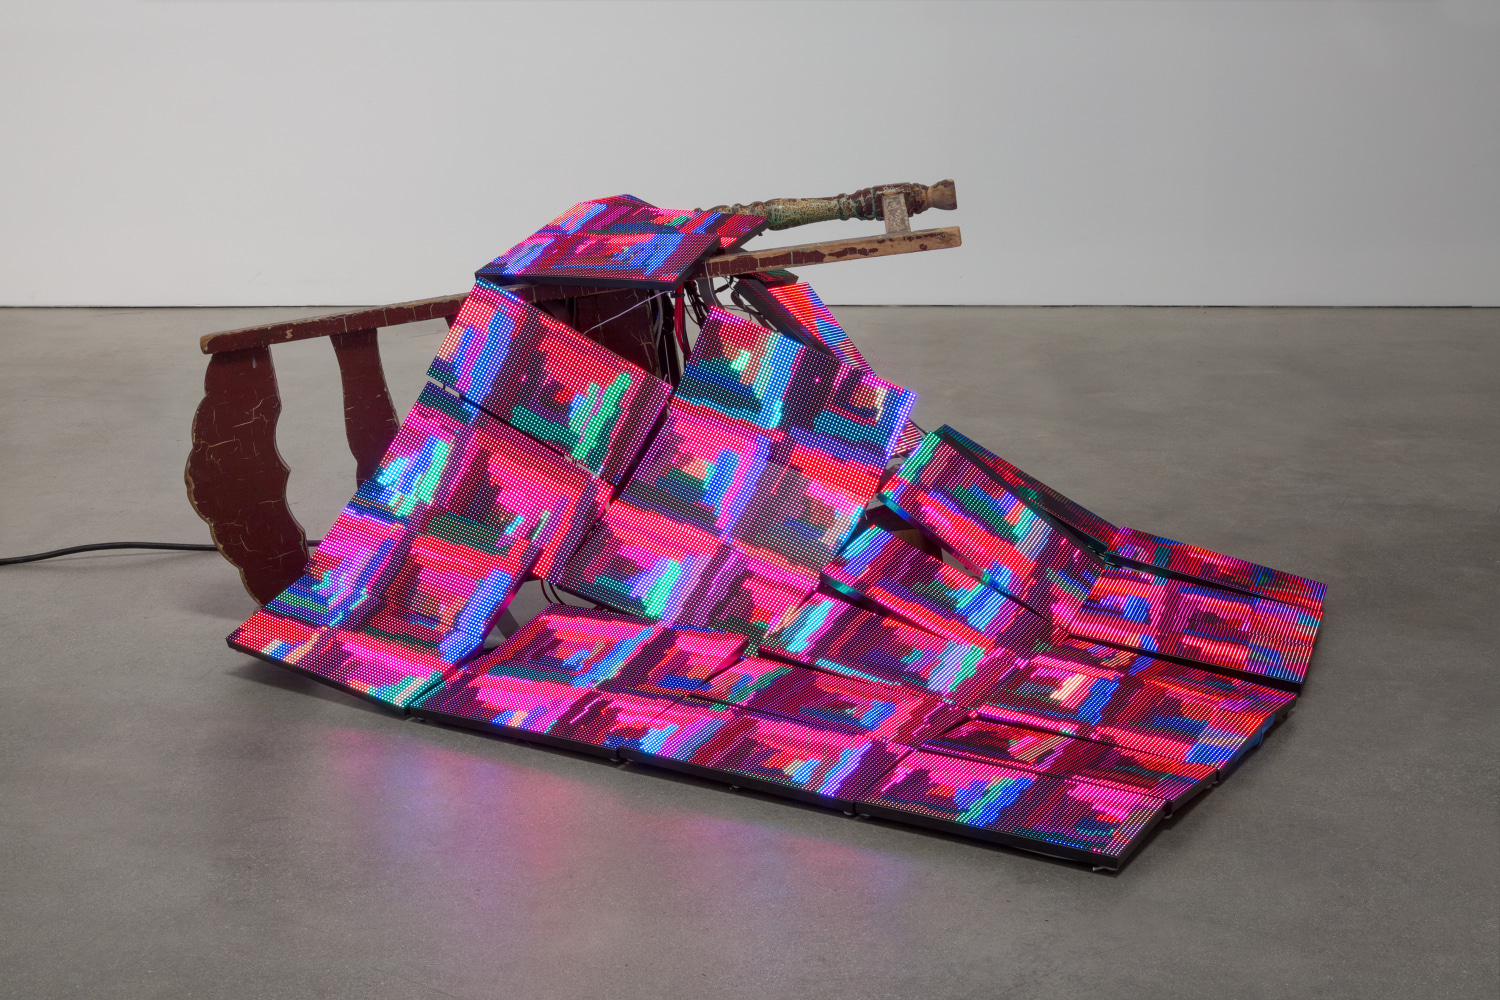 Luke Murphy, &quot;Quilt and Discarded Chair,&quot; 2020